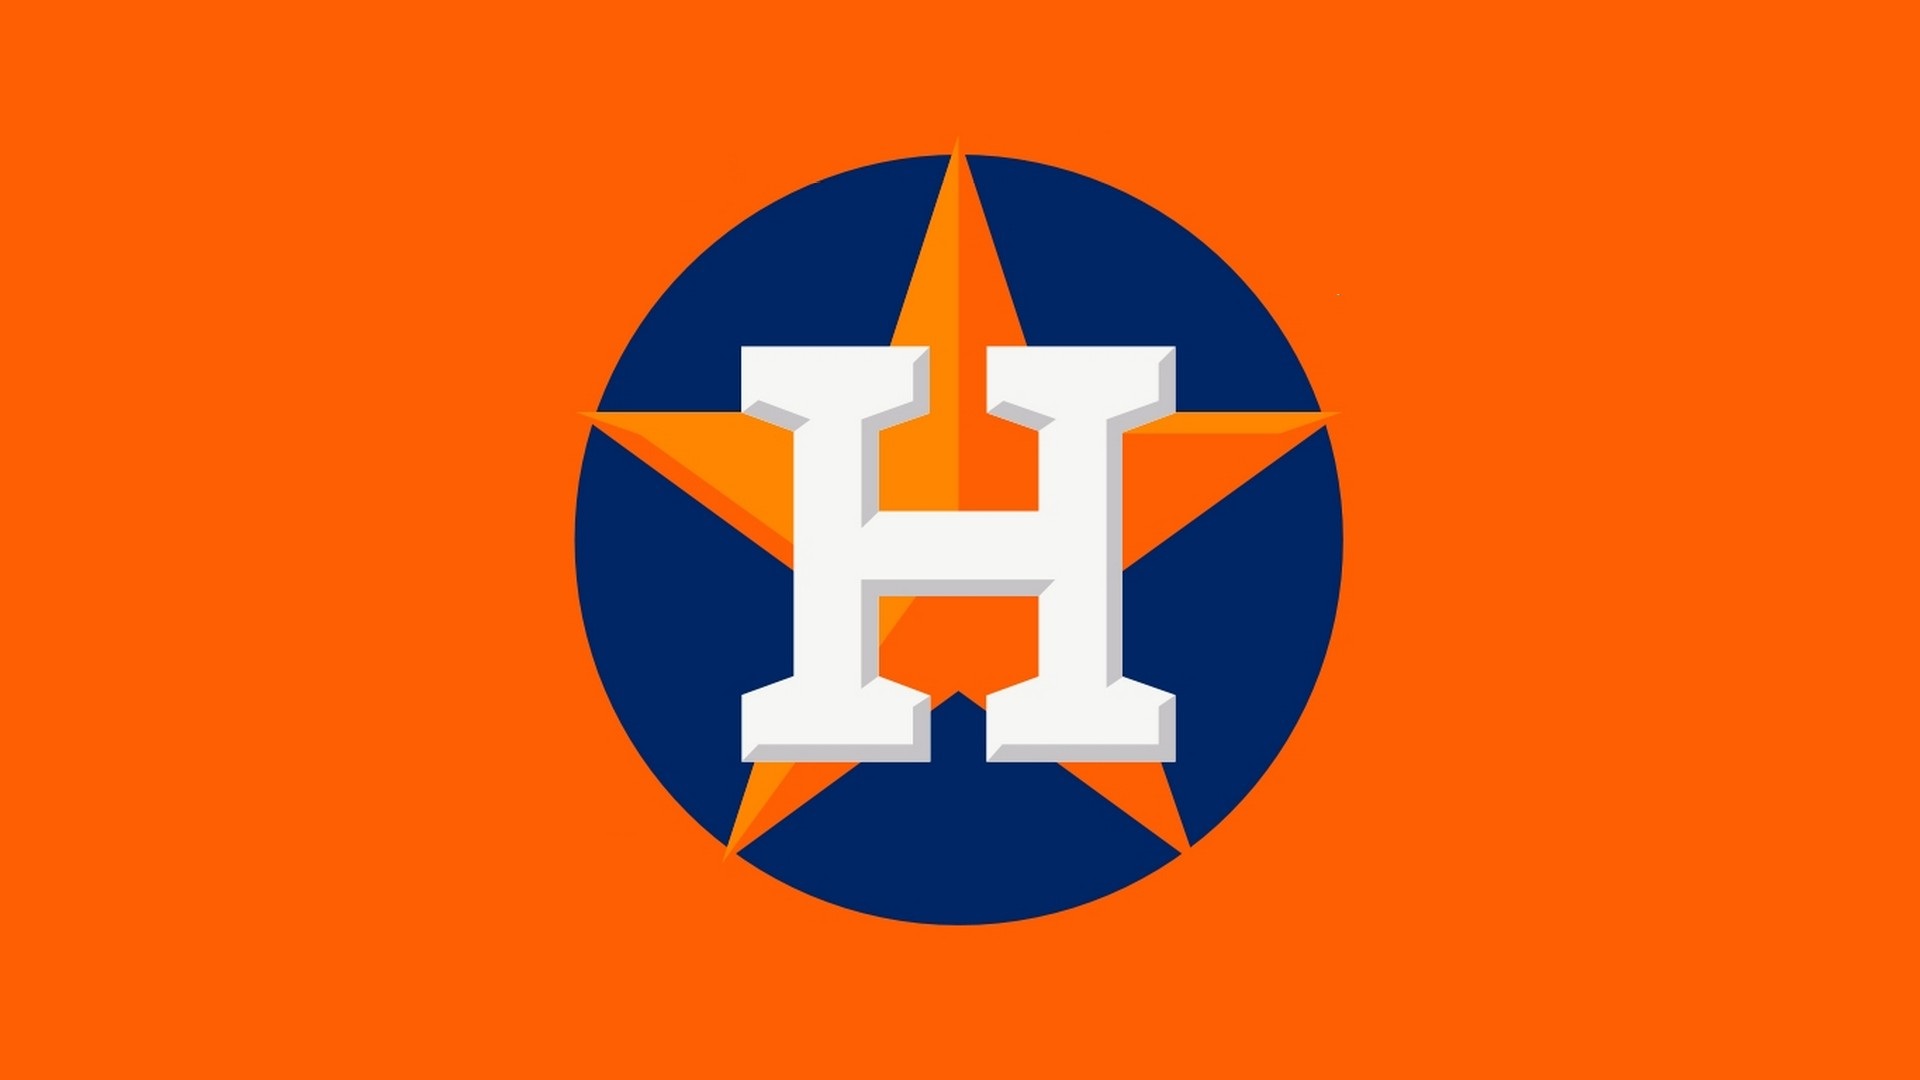 Wallpaper Desktop Houston Astros HD With high-resolution 1920X1080 pixel. You can use this wallpaper for Mac Desktop Wallpaper, Laptop Screensavers, Android Wallpapers, Tablet or iPhone Home Screen and another mobile phone device